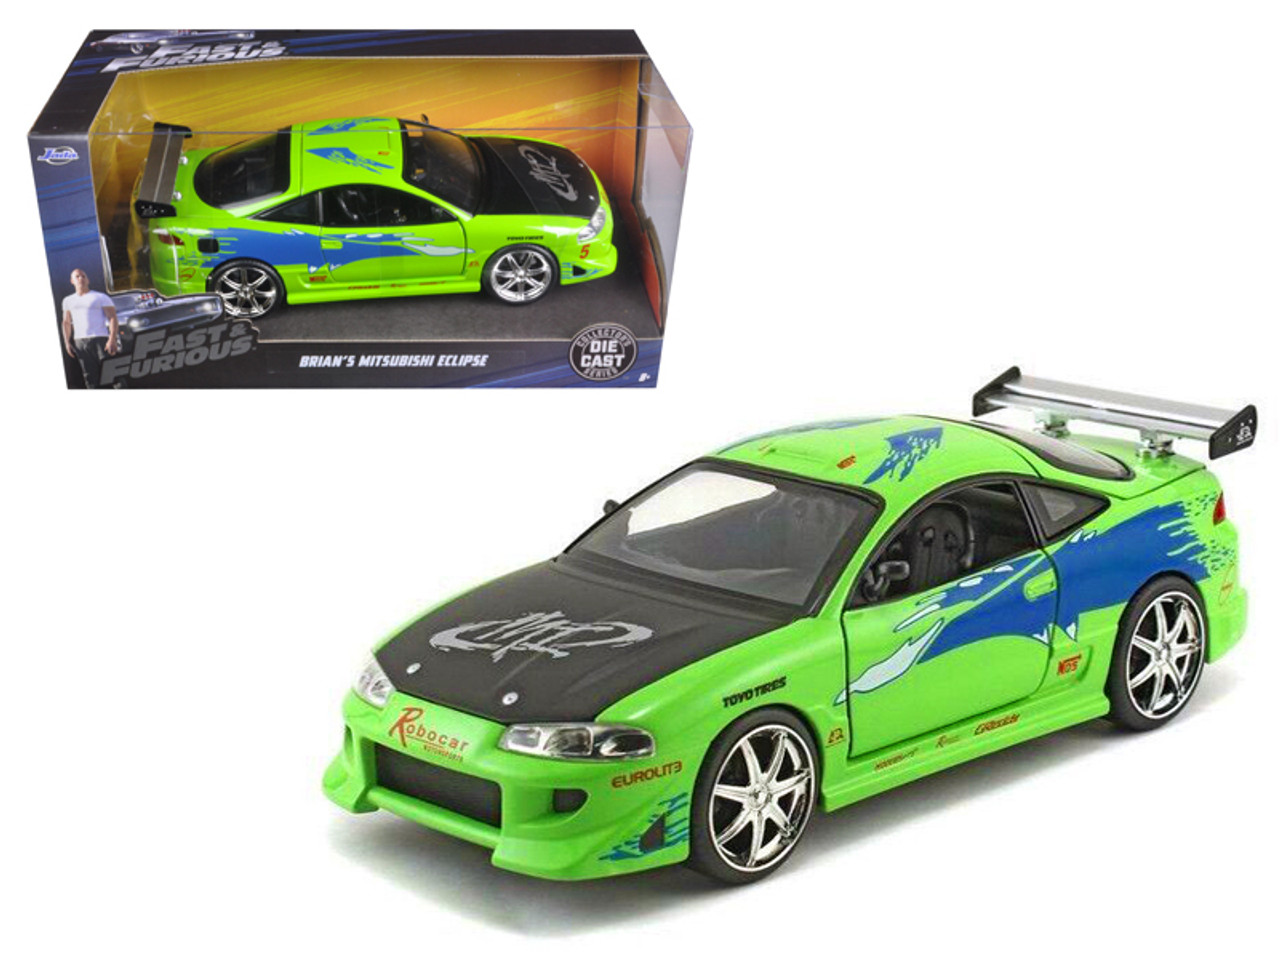 Artisan Collection Fast & Furious The Fast and the Furious (2001